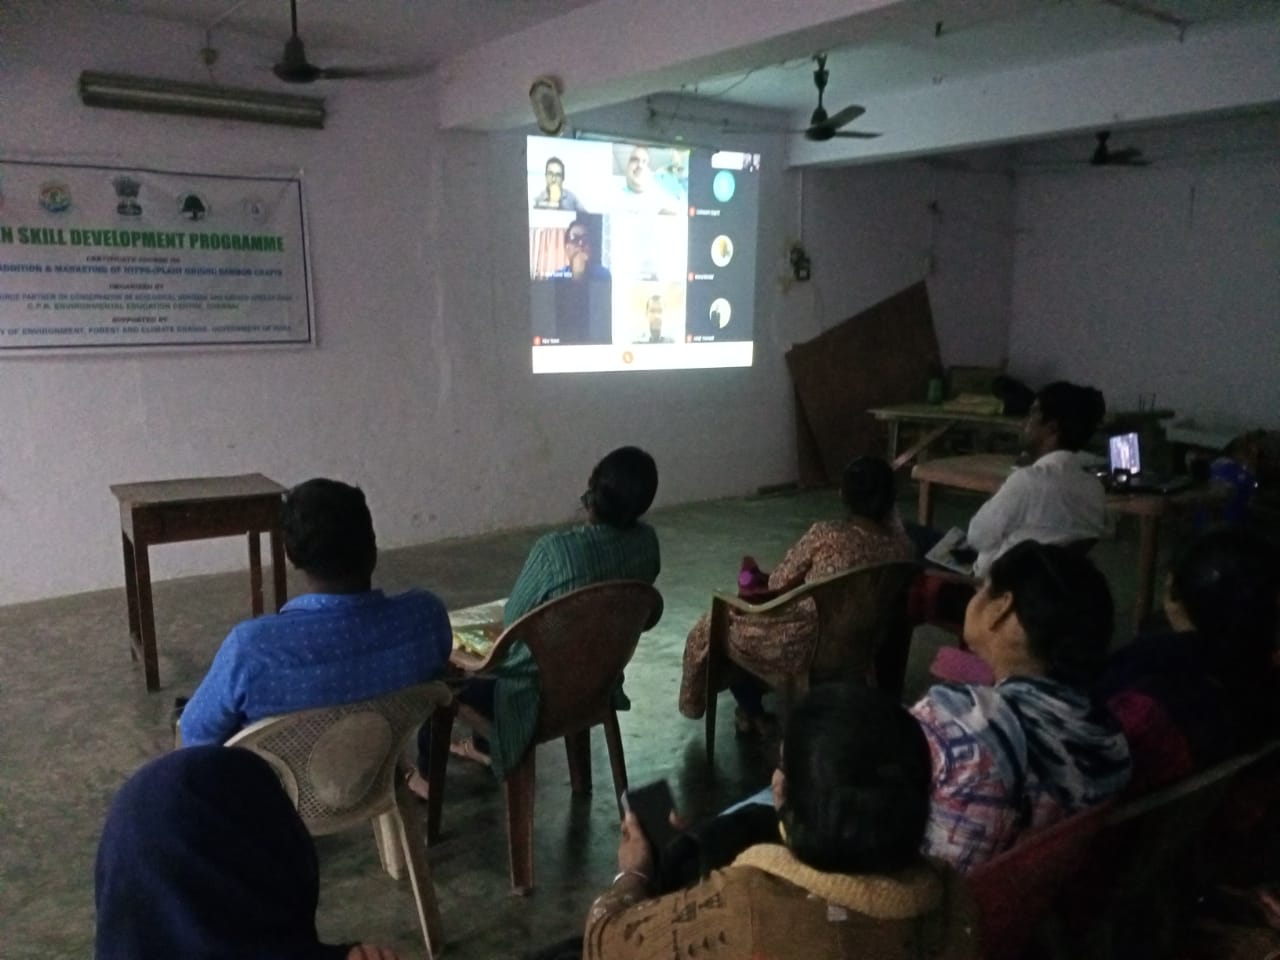 Trainees attended the webinar on Intellectual property rights, organized by Br. MSME Development